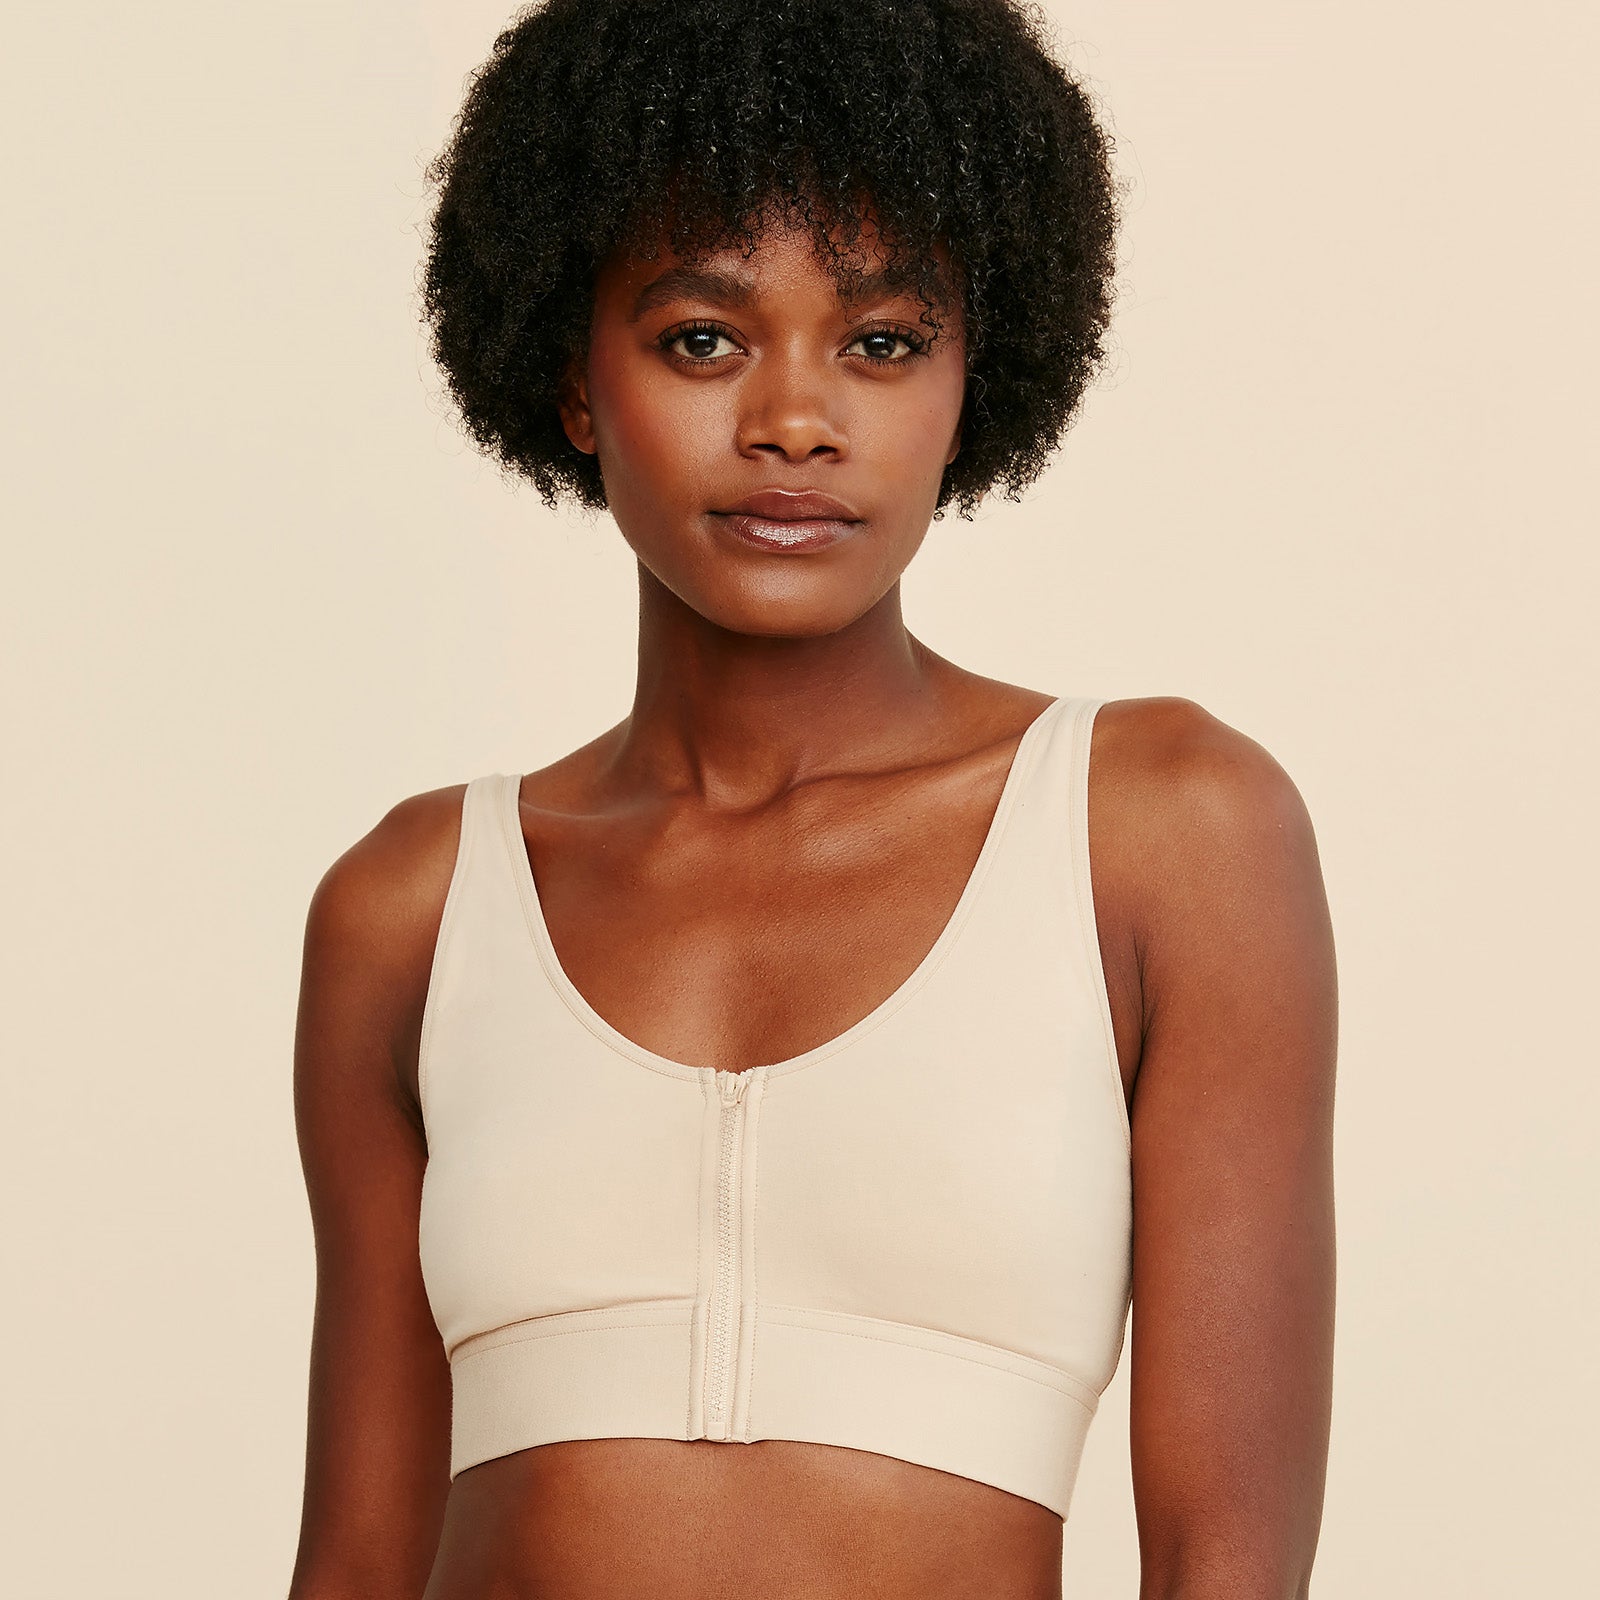 Wilderness Front Closure Pocketed Bra - Buff - Meadow